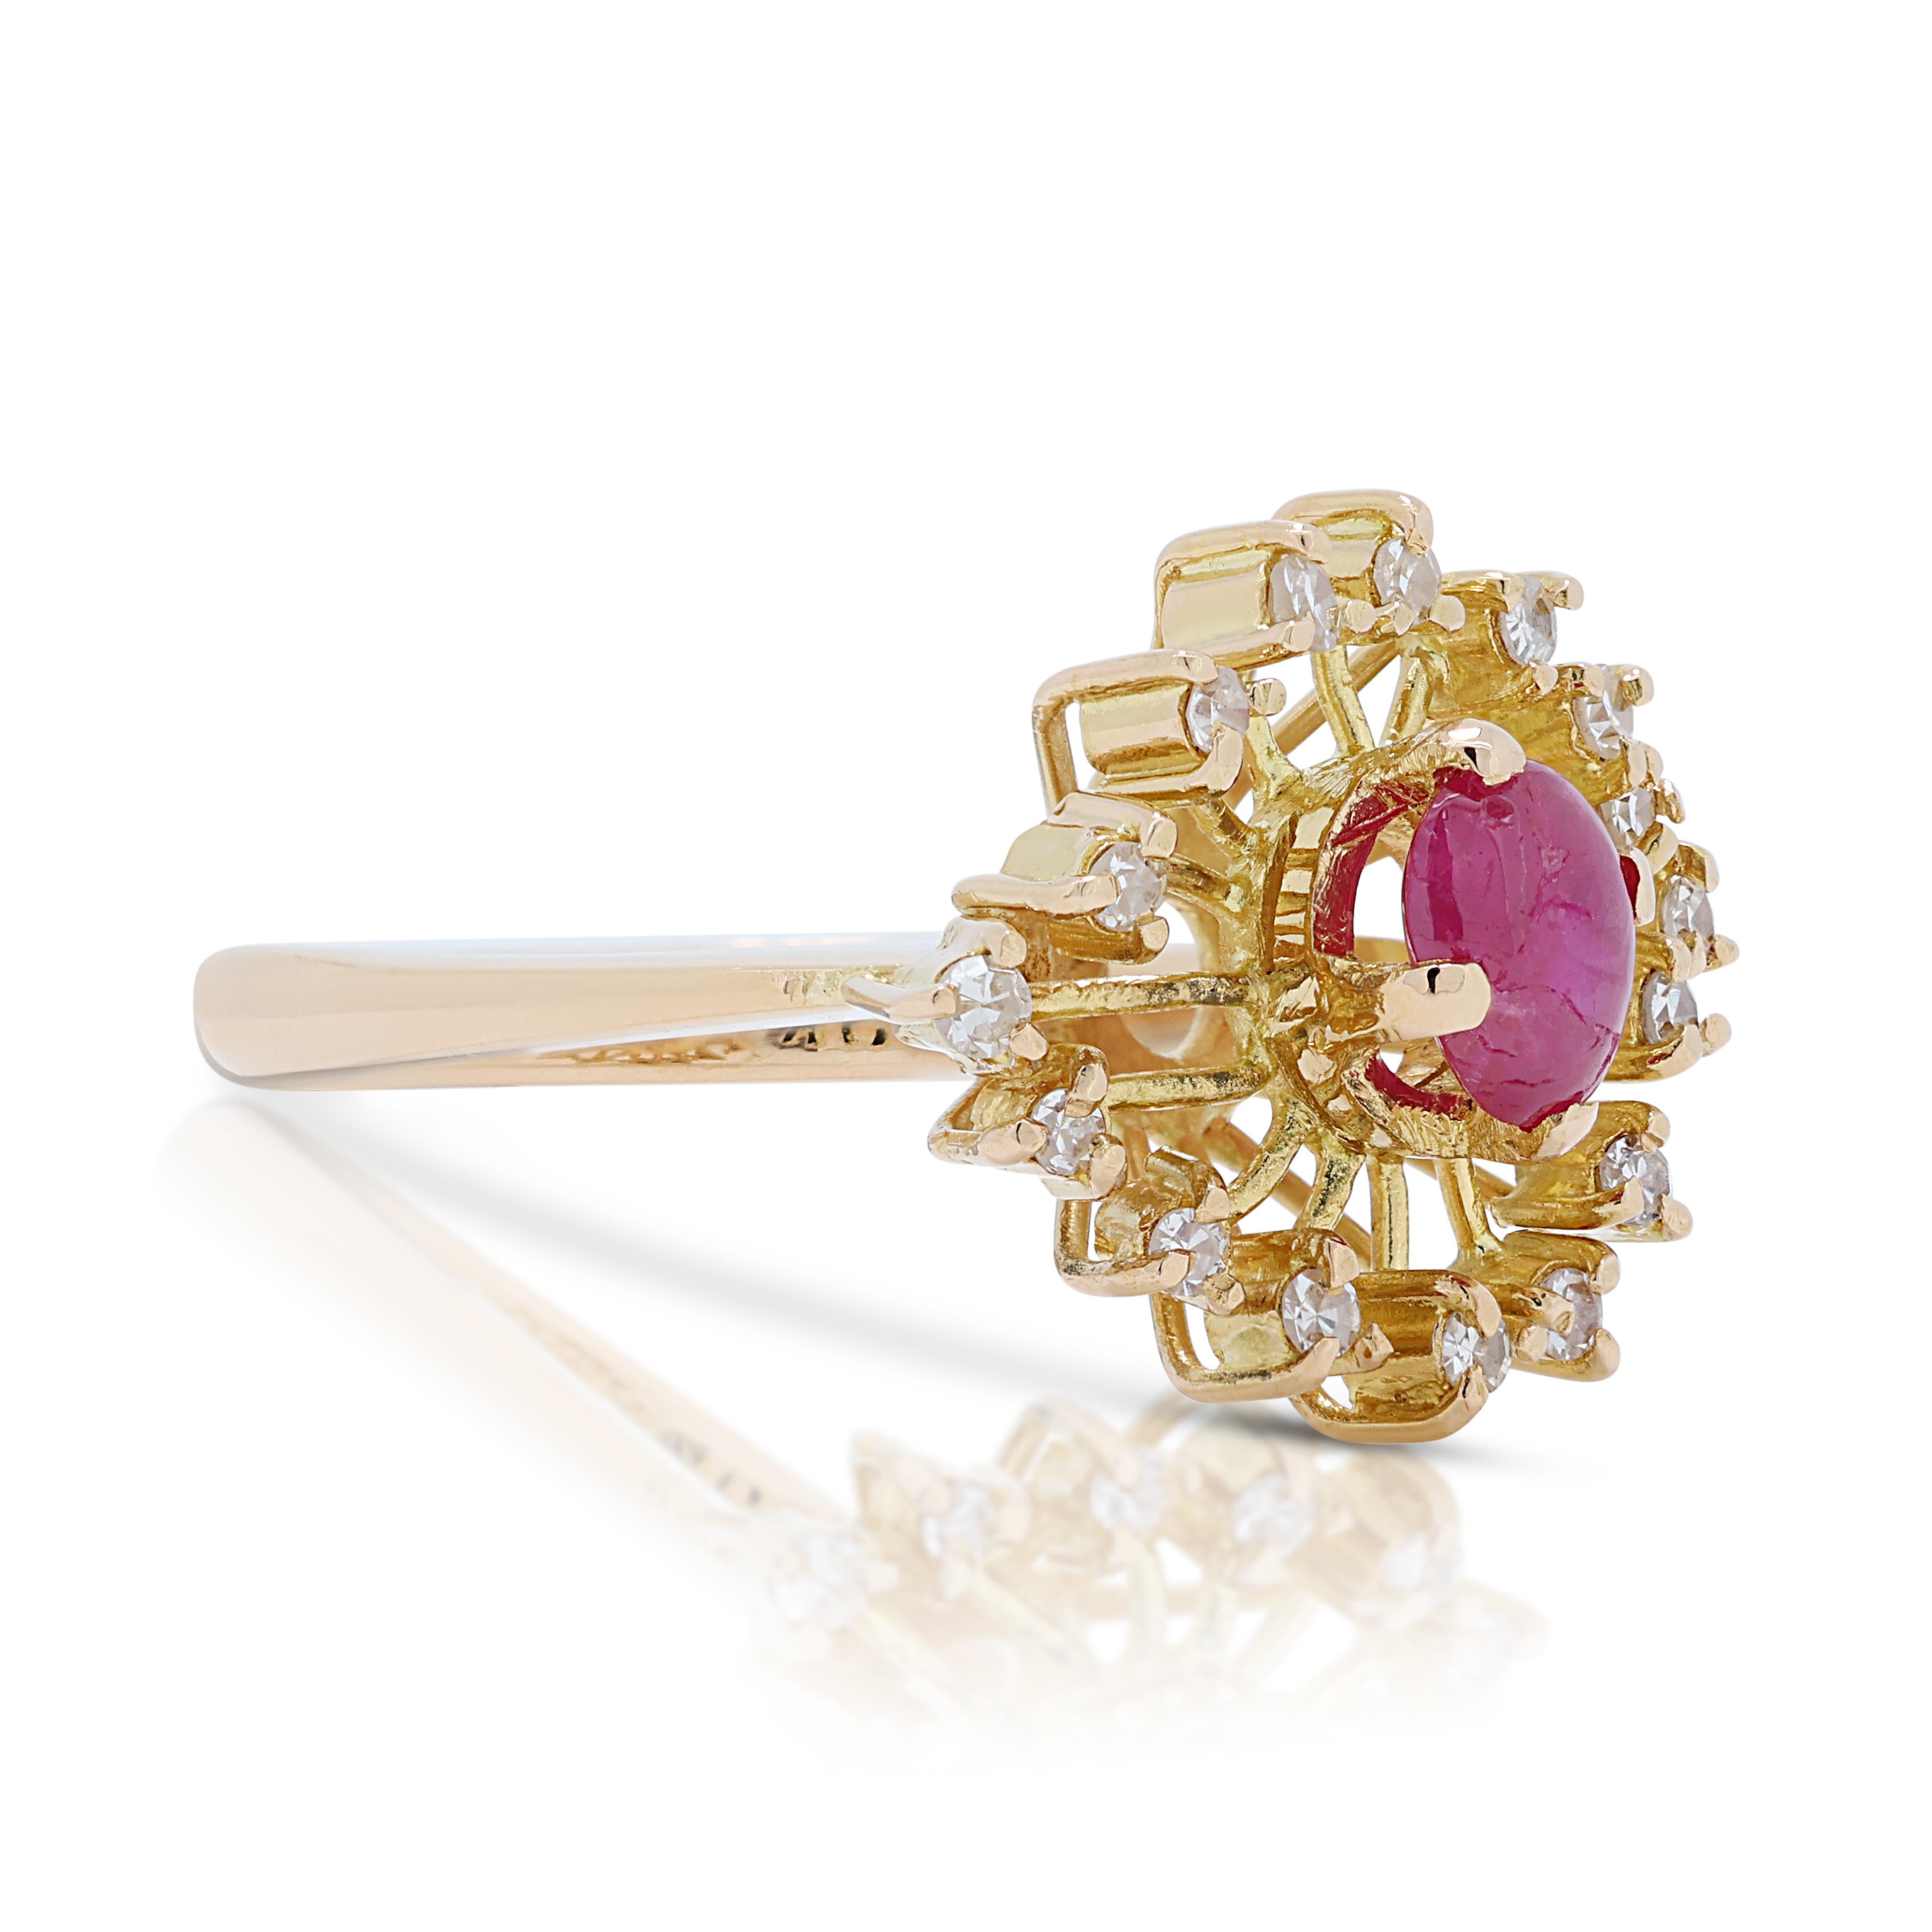 Captivating 0.45ct Tourmaline Cluster Ring in 22K Yellow Gold with Diamonds For Sale 1